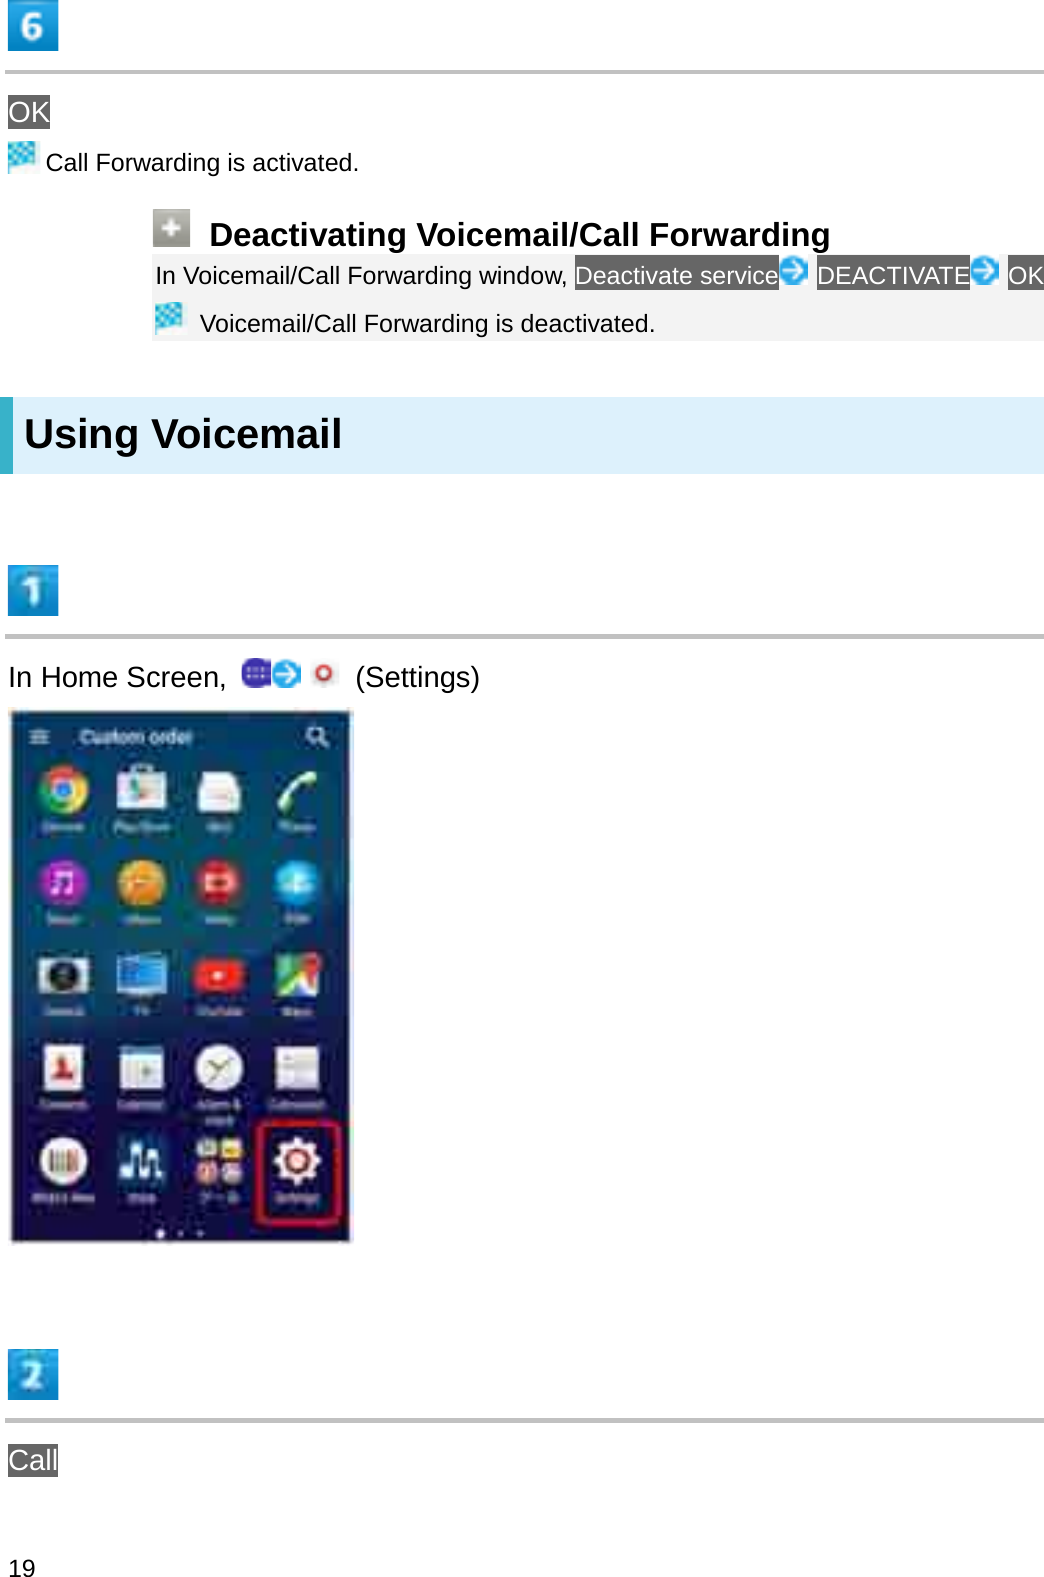 OKCall Forwarding is activated.Deactivating Voicemail/Call ForwardingIn Voicemail/Call Forwarding window, Deactivate service DEACTIVATE OKVoicemail/Call Forwarding is deactivated.Using VoicemailIn Home Screen,  (Settings)Call19